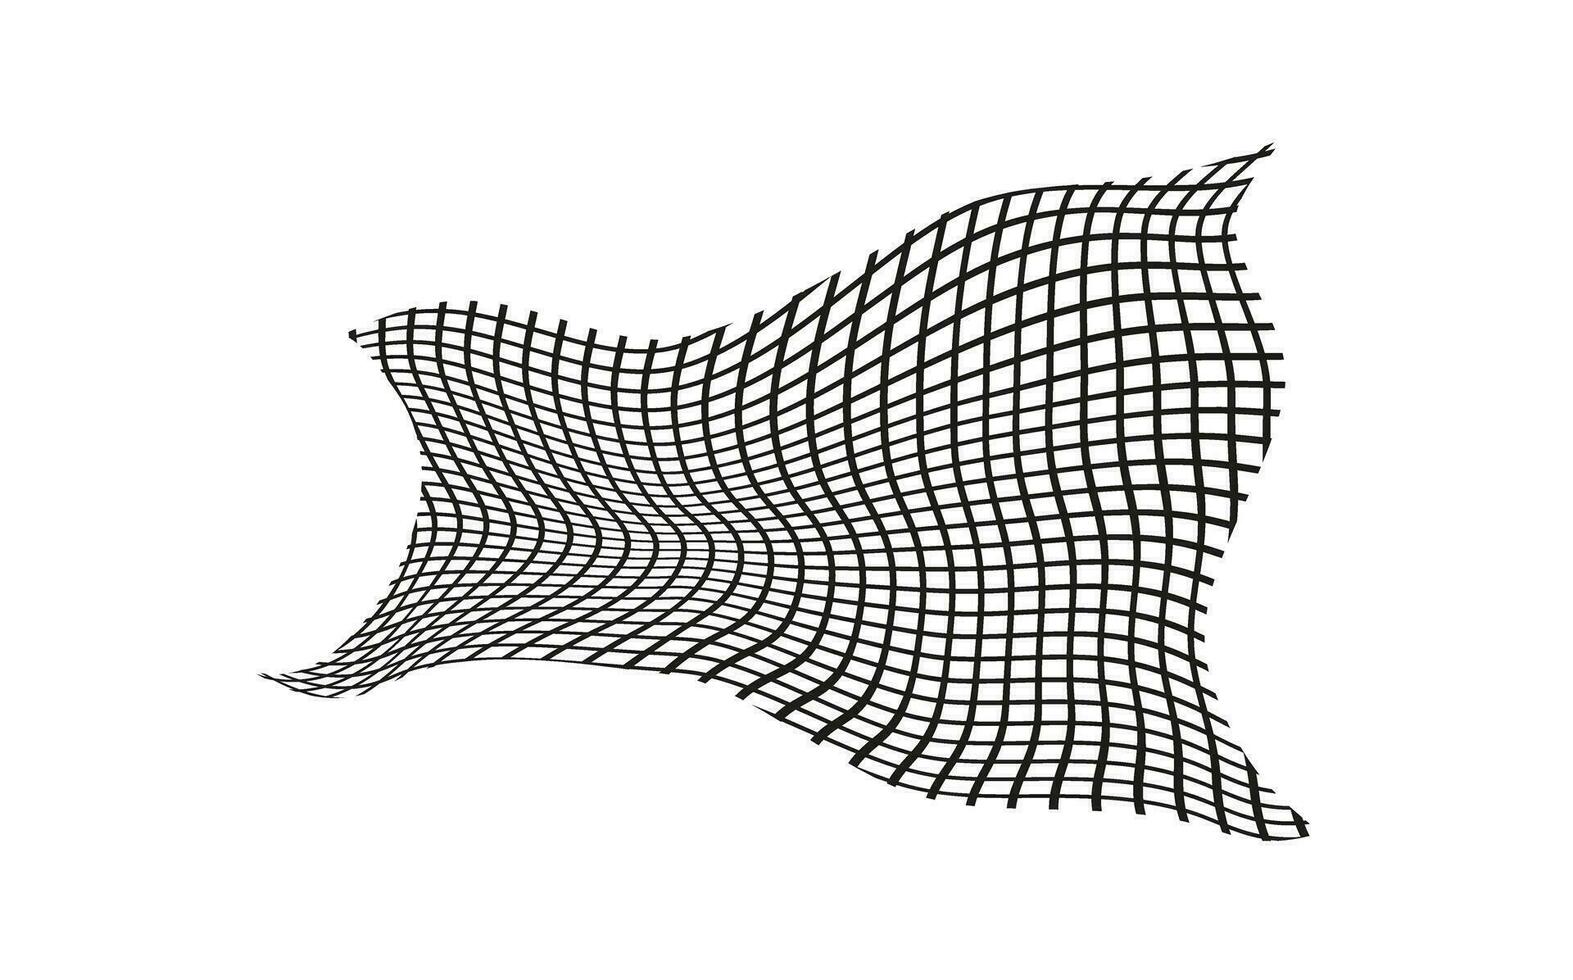 Illustration of a black fishing or football net.Checkered wavy background in doodle style. vector